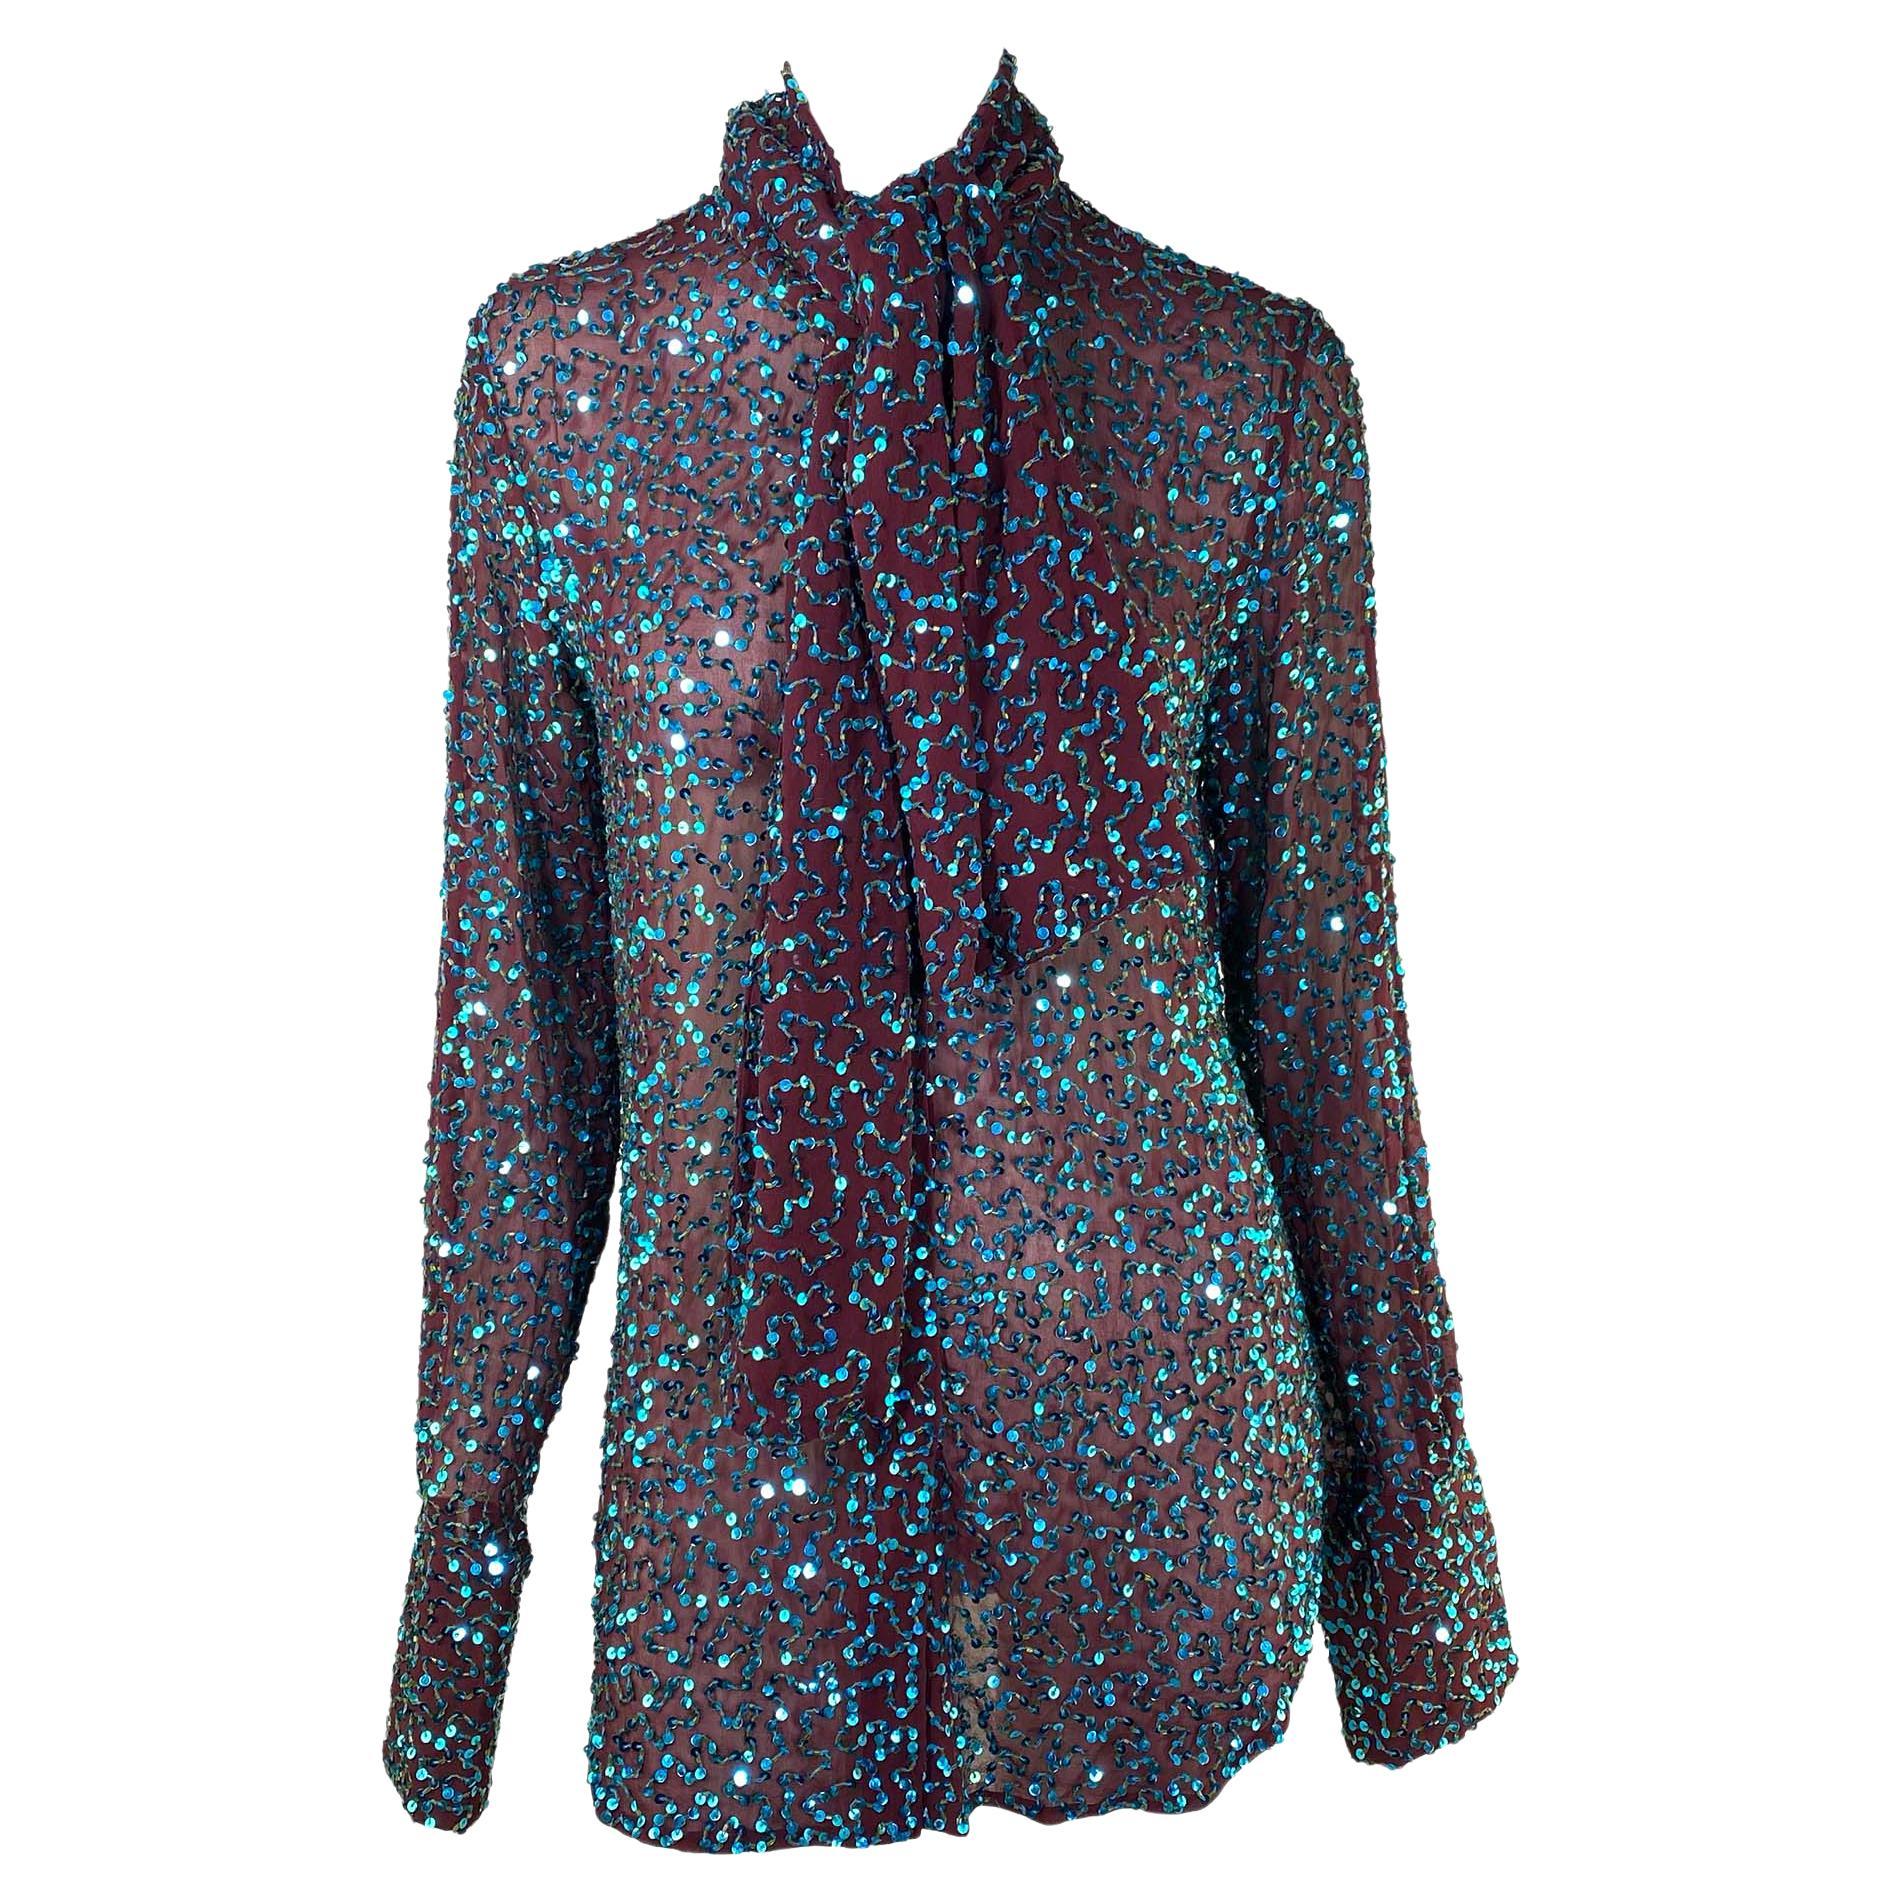 F/W 2000 Dolce & Gabbana Blue Sequin Pussy Bow Blouse Sheer Maroon